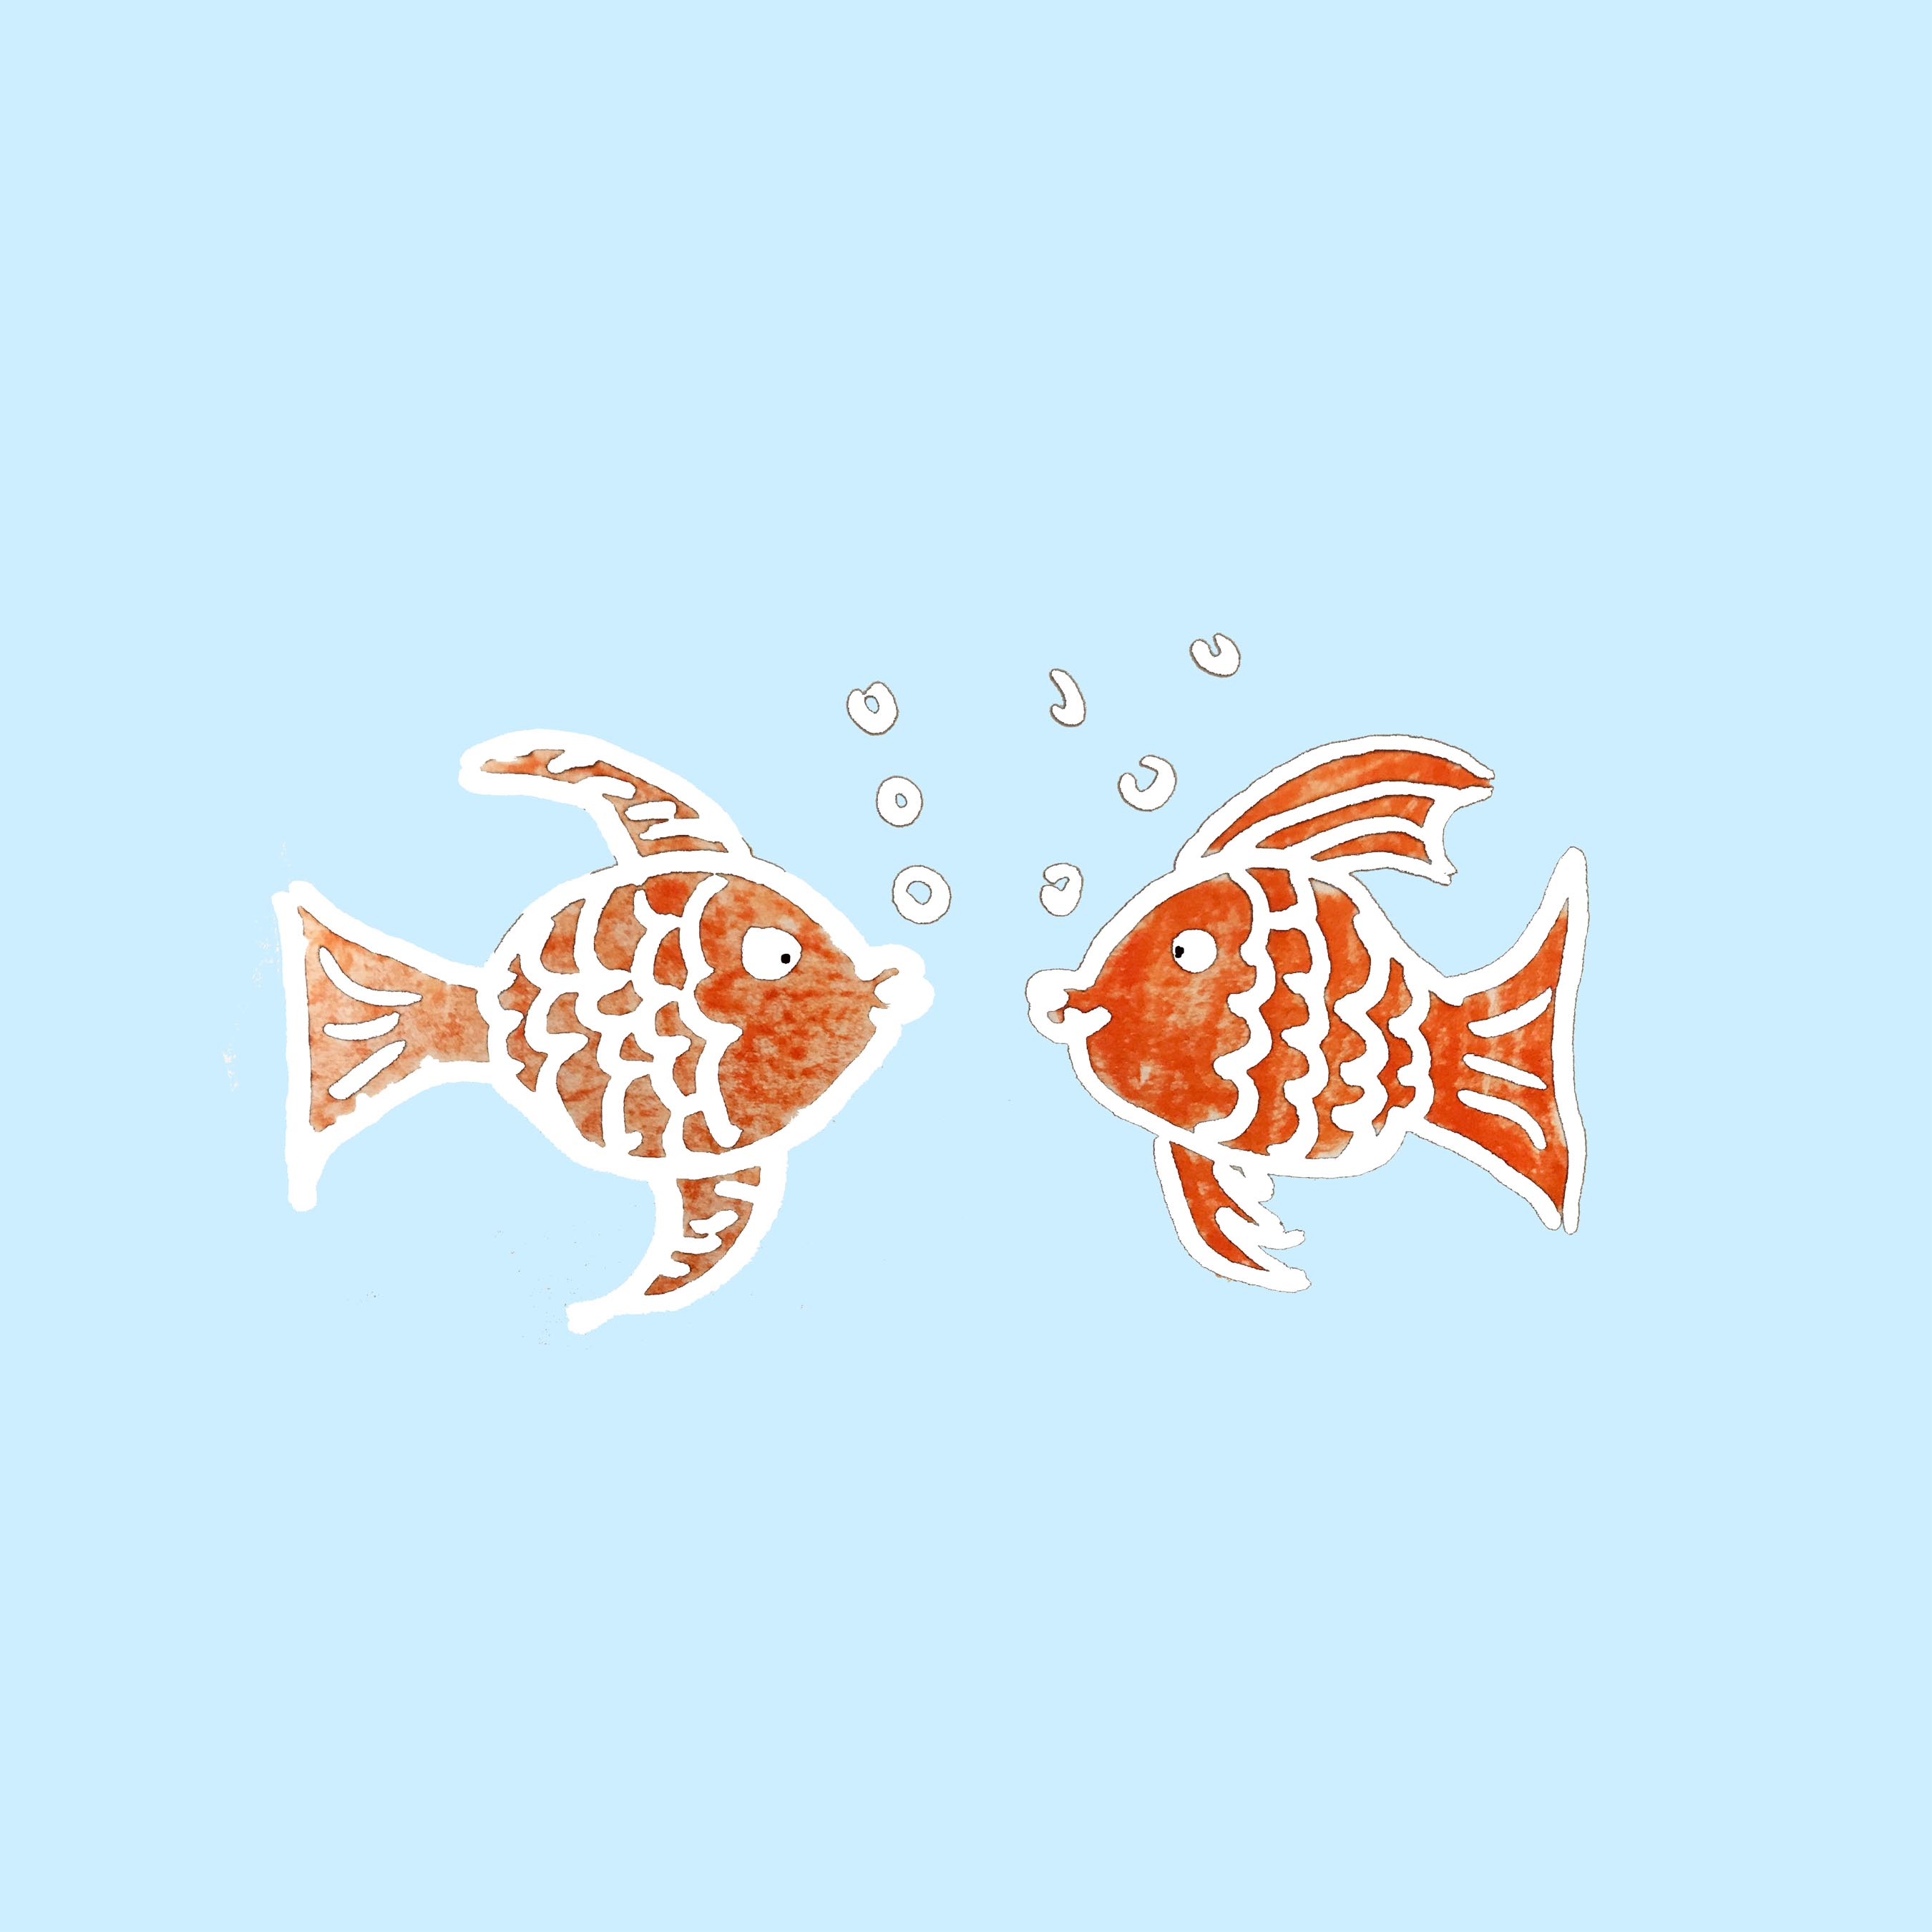 art every day number 435 / guest artist drawing / two fish